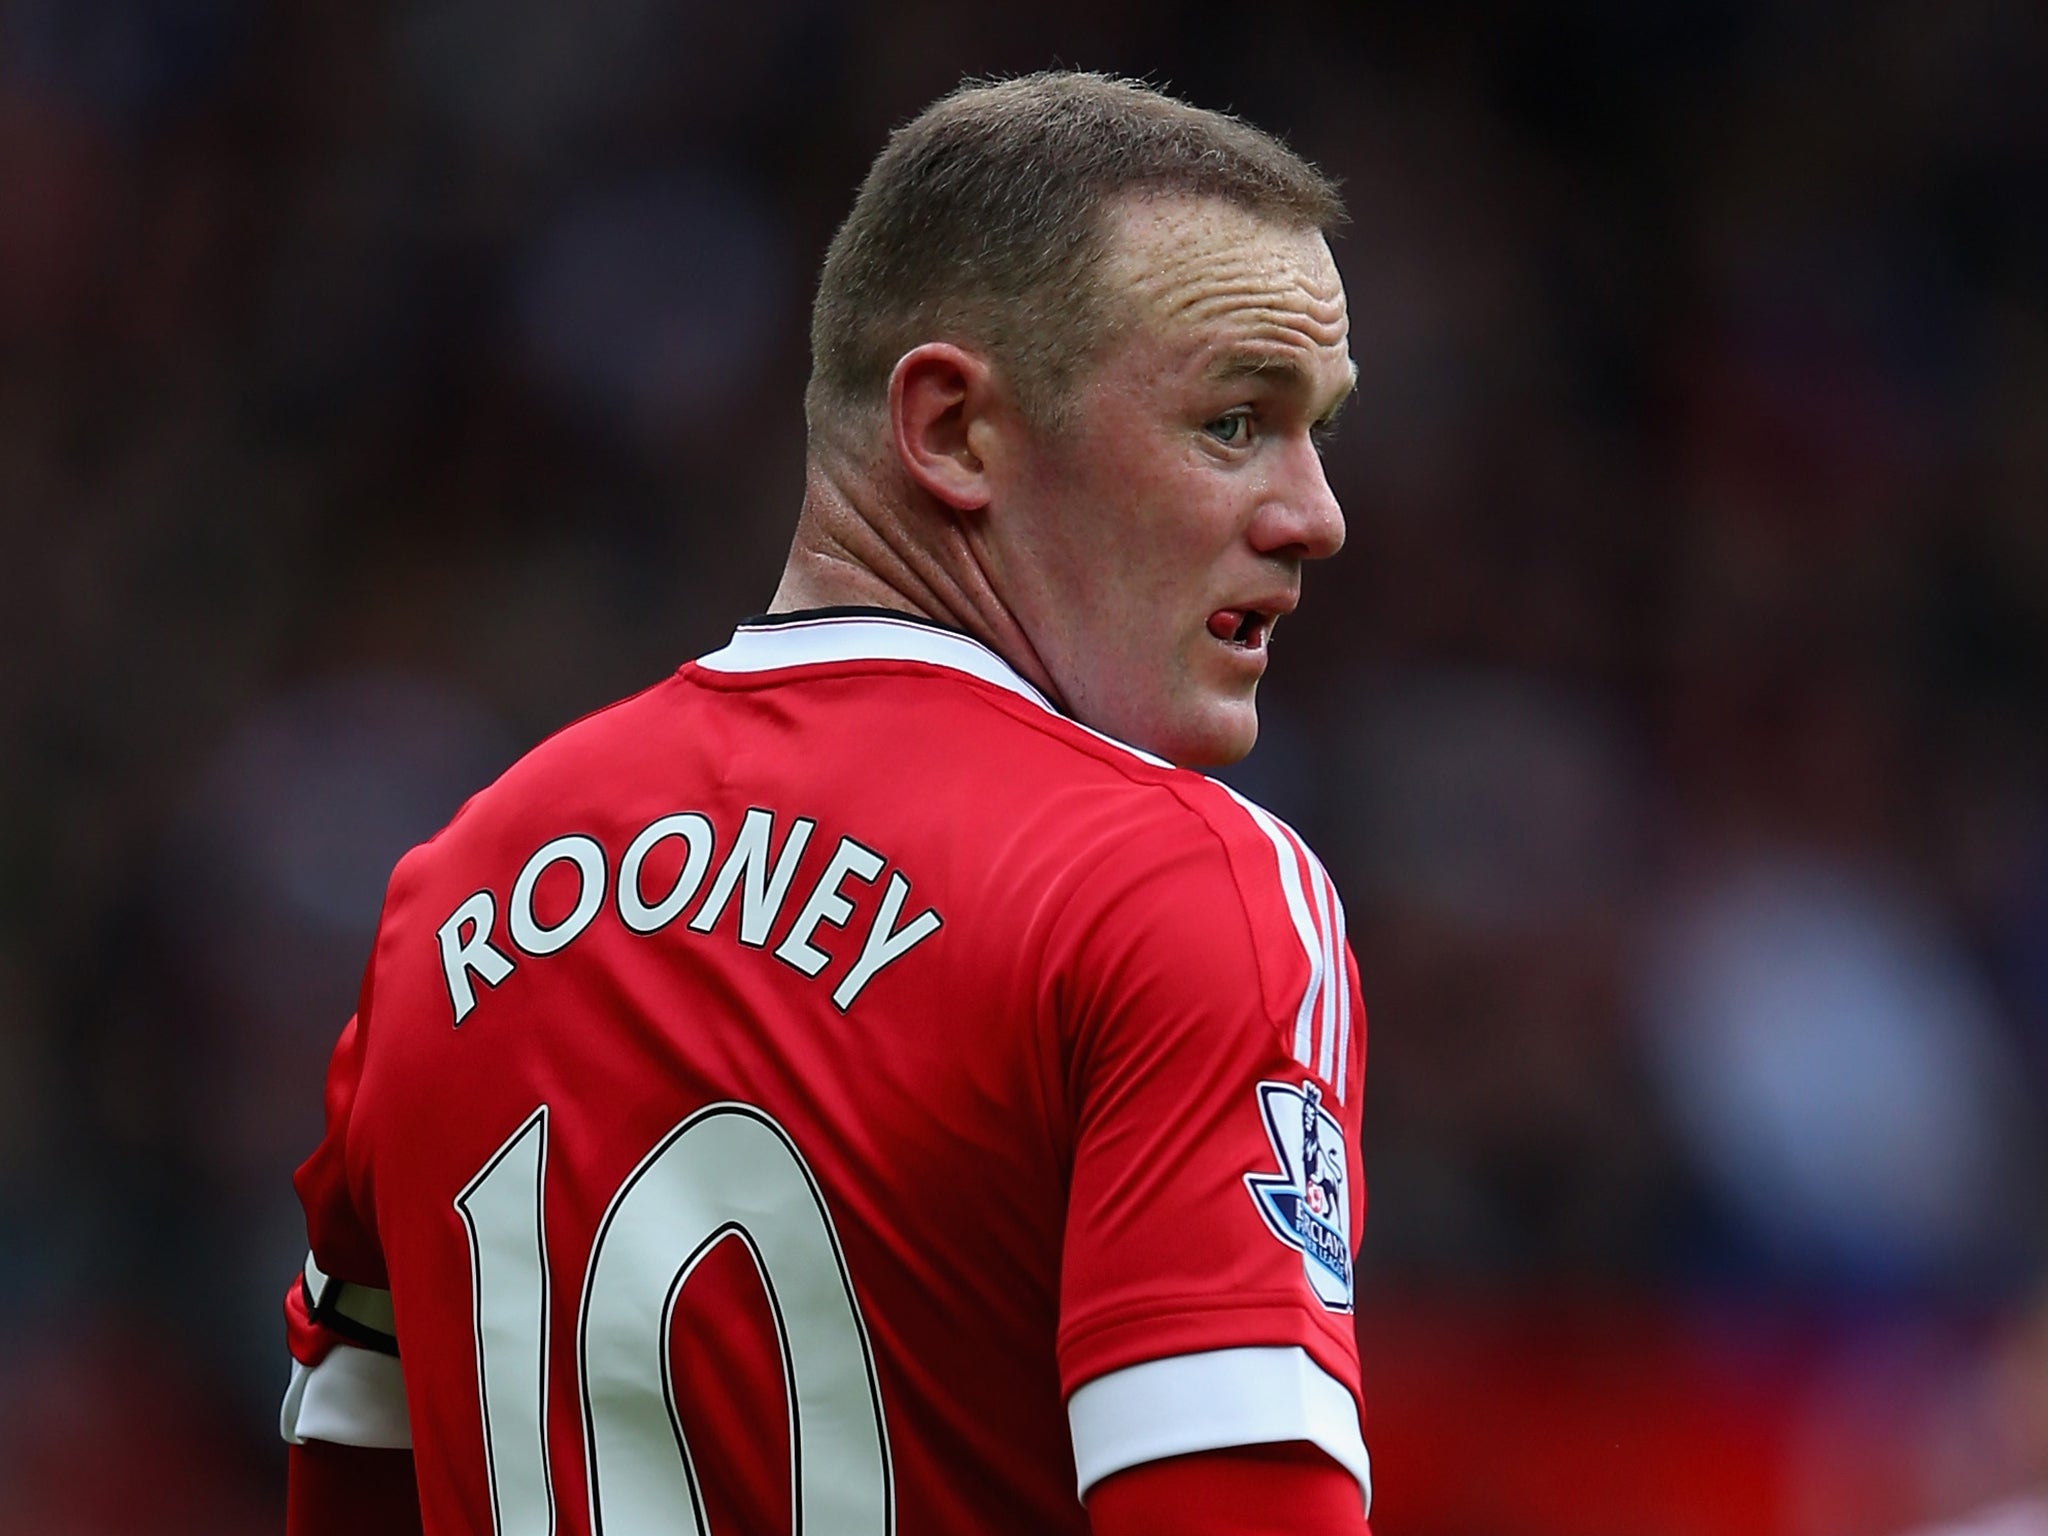 Wayne Rooney: Manchester United and England tops Sports Rich List with